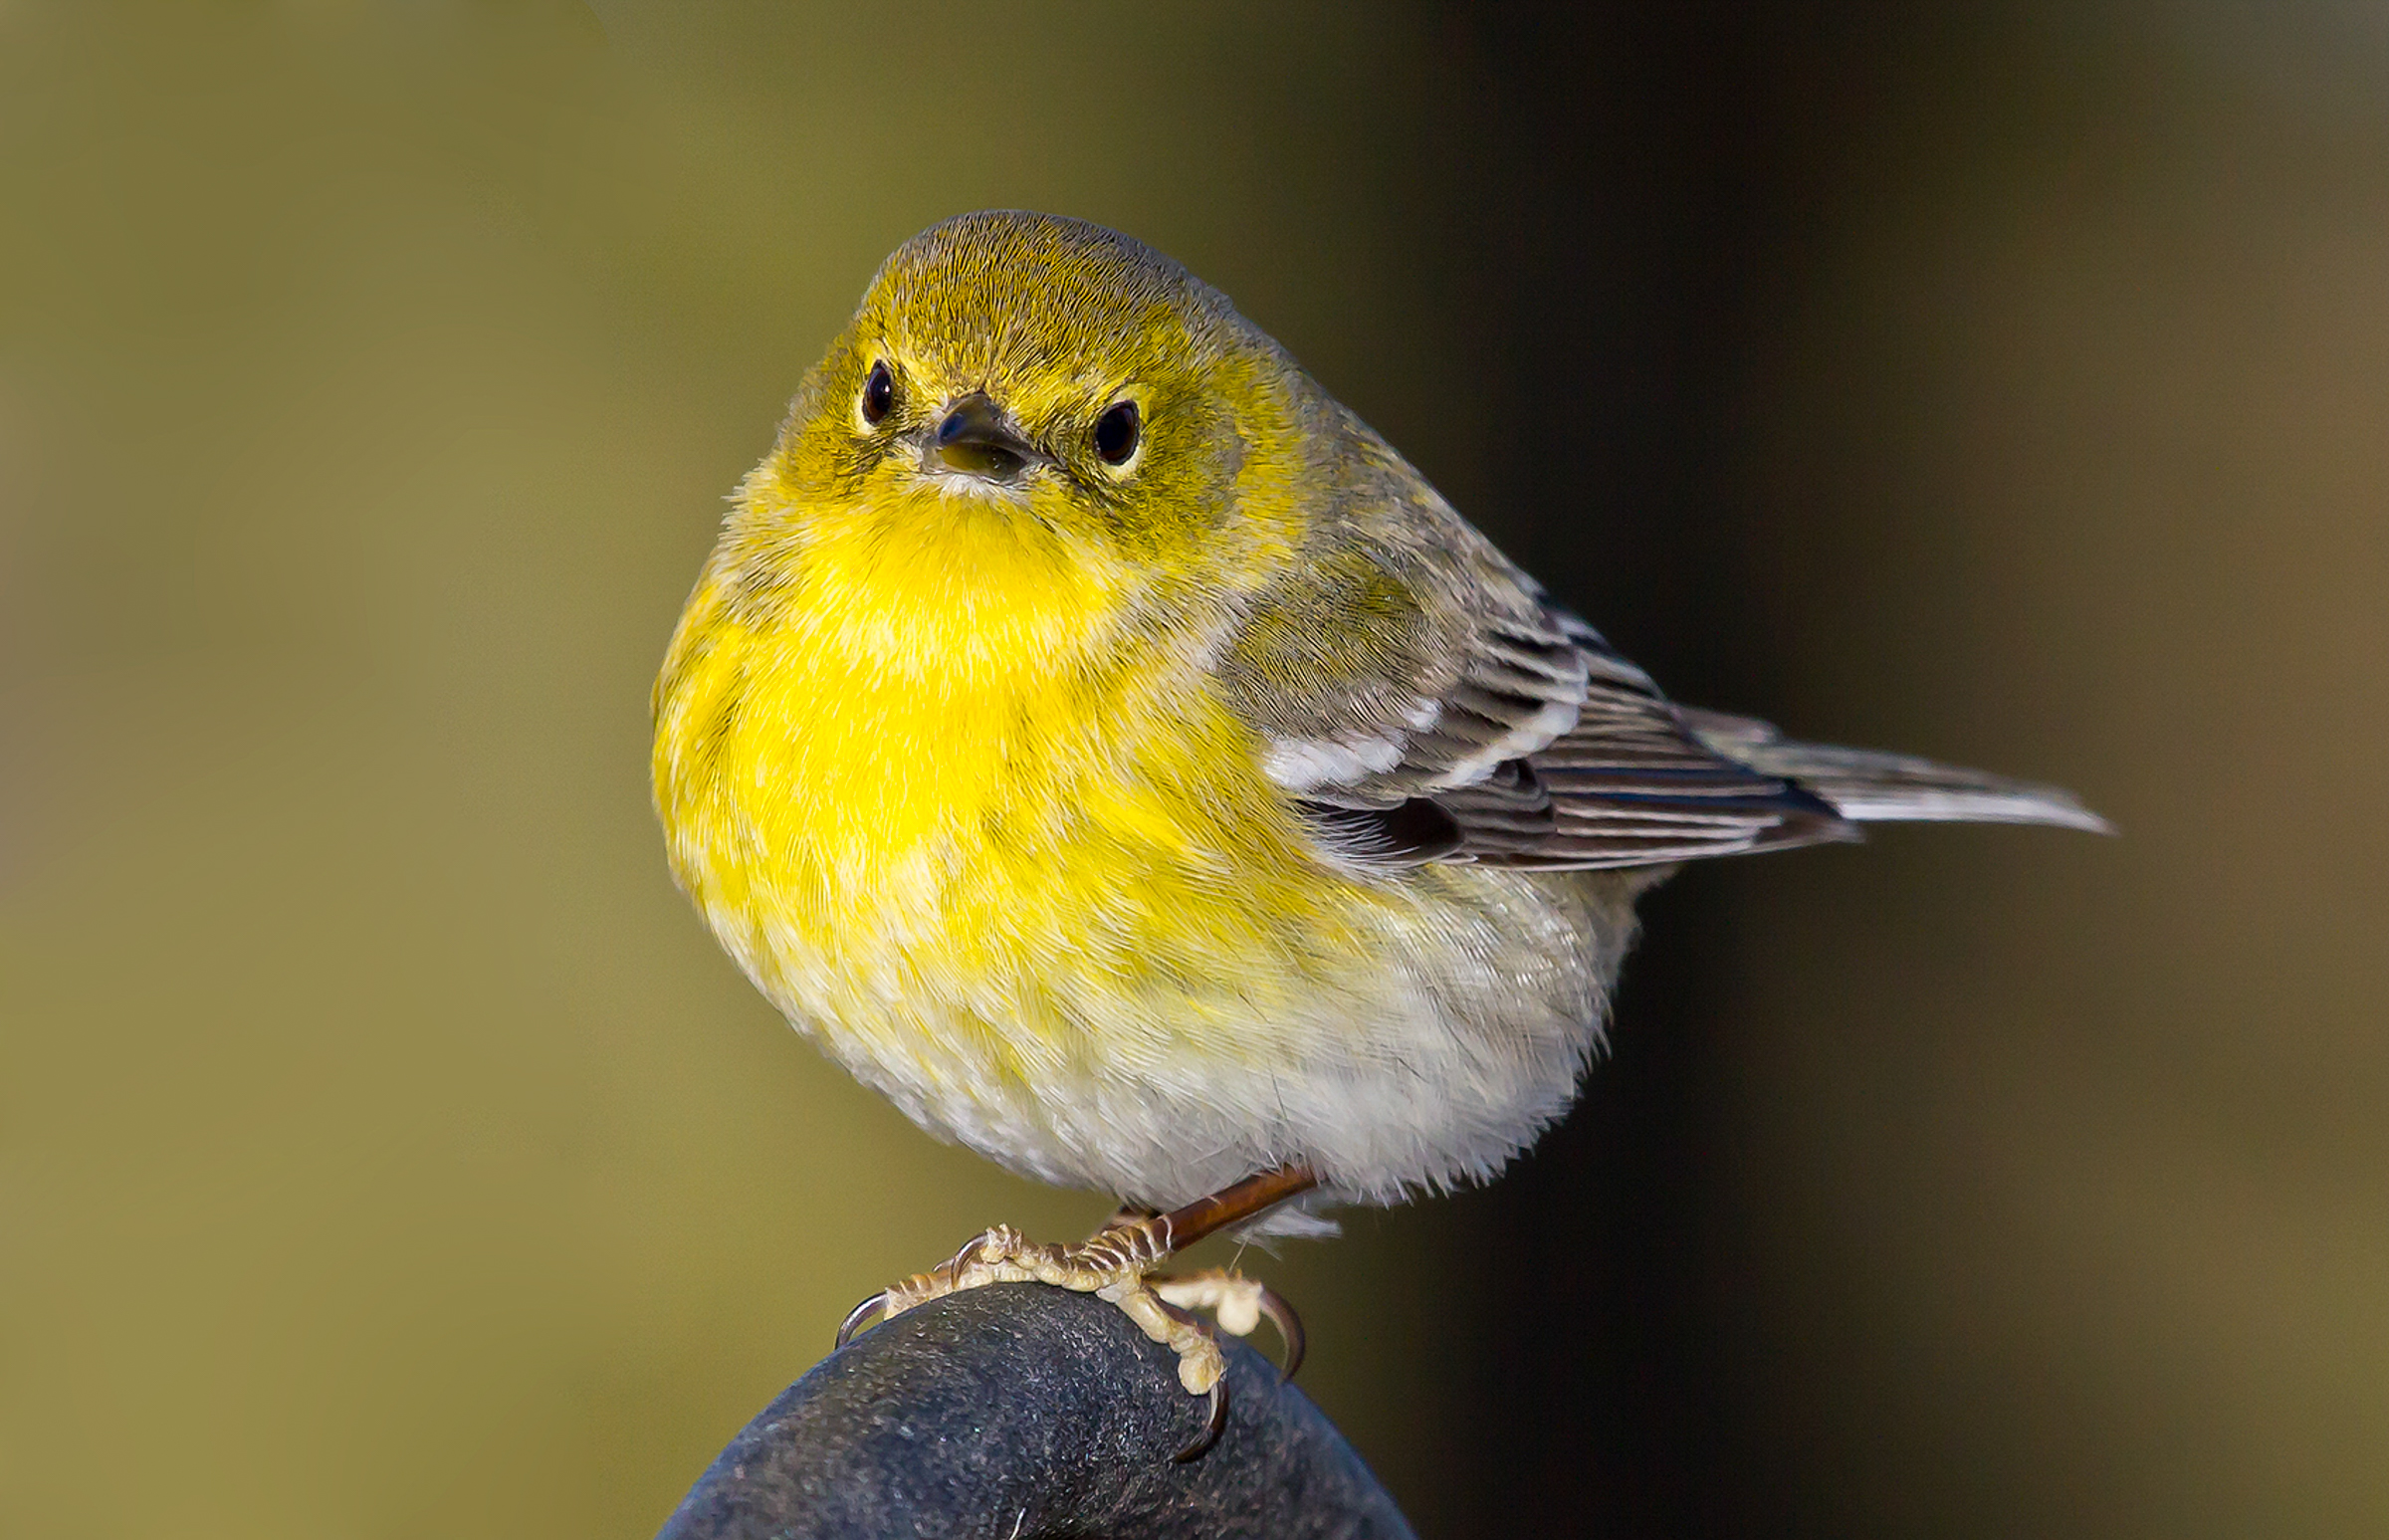 Close up of a perched Pine Warbler looking at the camera.